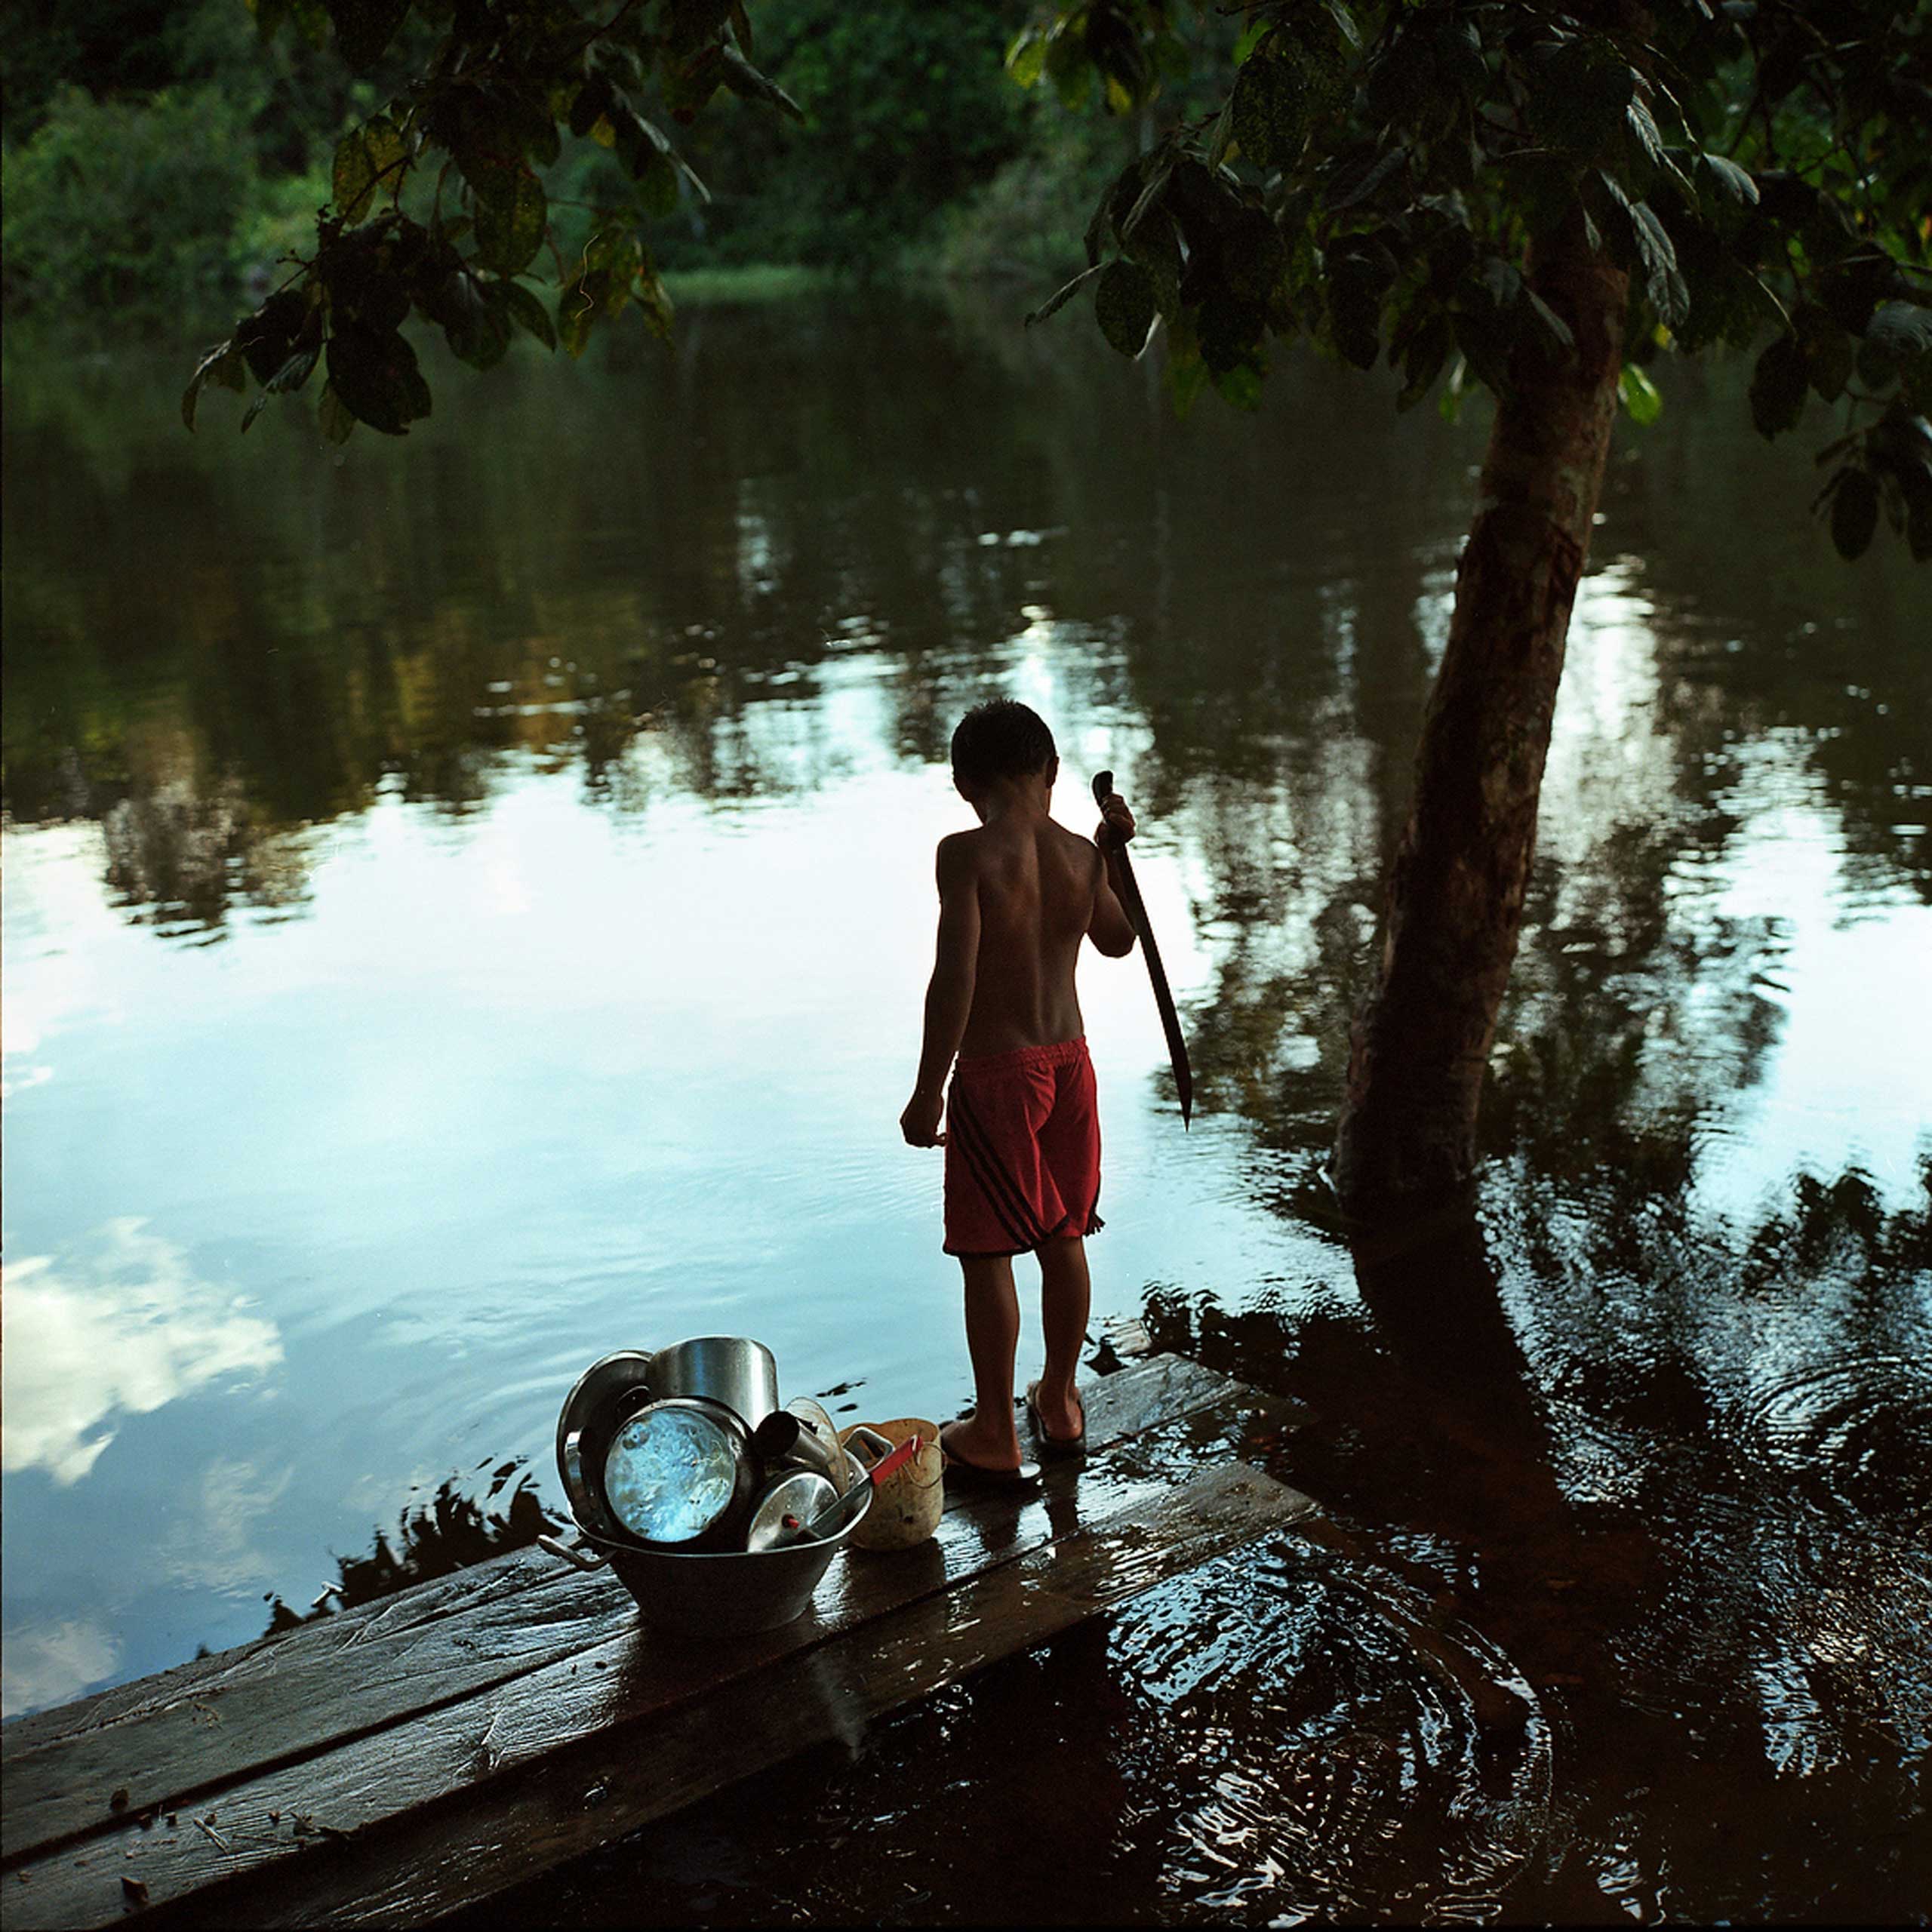 A boy plays by the river on the Extractavist Reserve of Riozinho do Anfrísio in the Xingu Basin. Descendants of the Rubber Tapers who came to the forests during Brazils Rubber Boom, Extractavists see themselves as the protectors of the forest, fighting ranchers and loggers for the preservation of their land. Throughout the Amazon they are being threatened by development, April 2014.